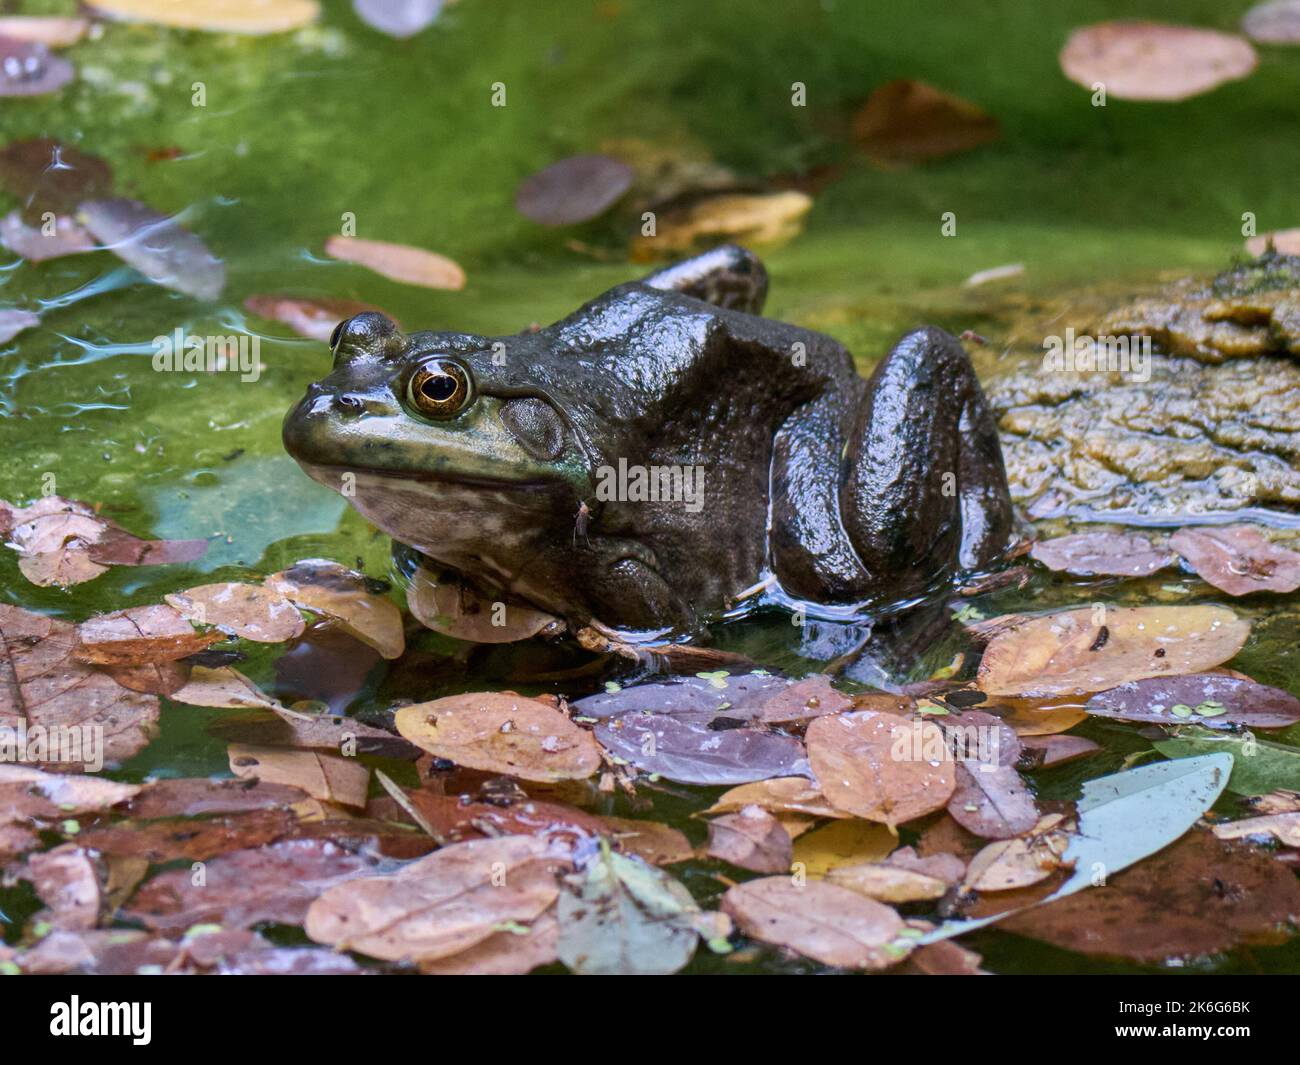 An American Bullfrog sitting in a pond surrounded by fallen dried leaves Stock Photo